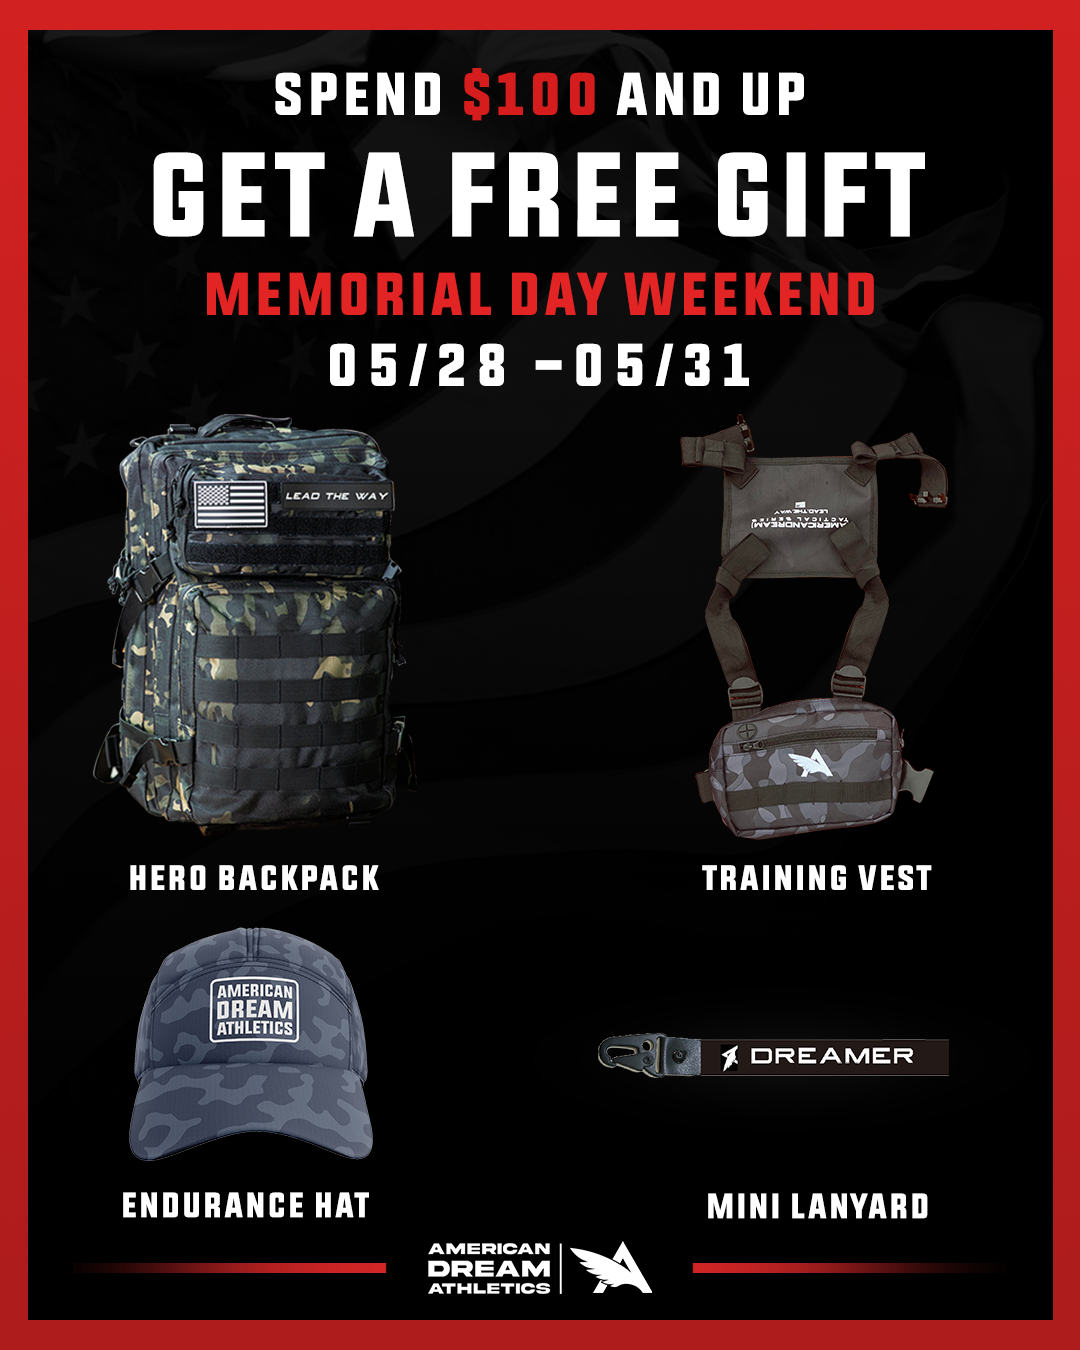 GET A GREE GIFT THIS MEMORIAL DAY WEEKEND 2021